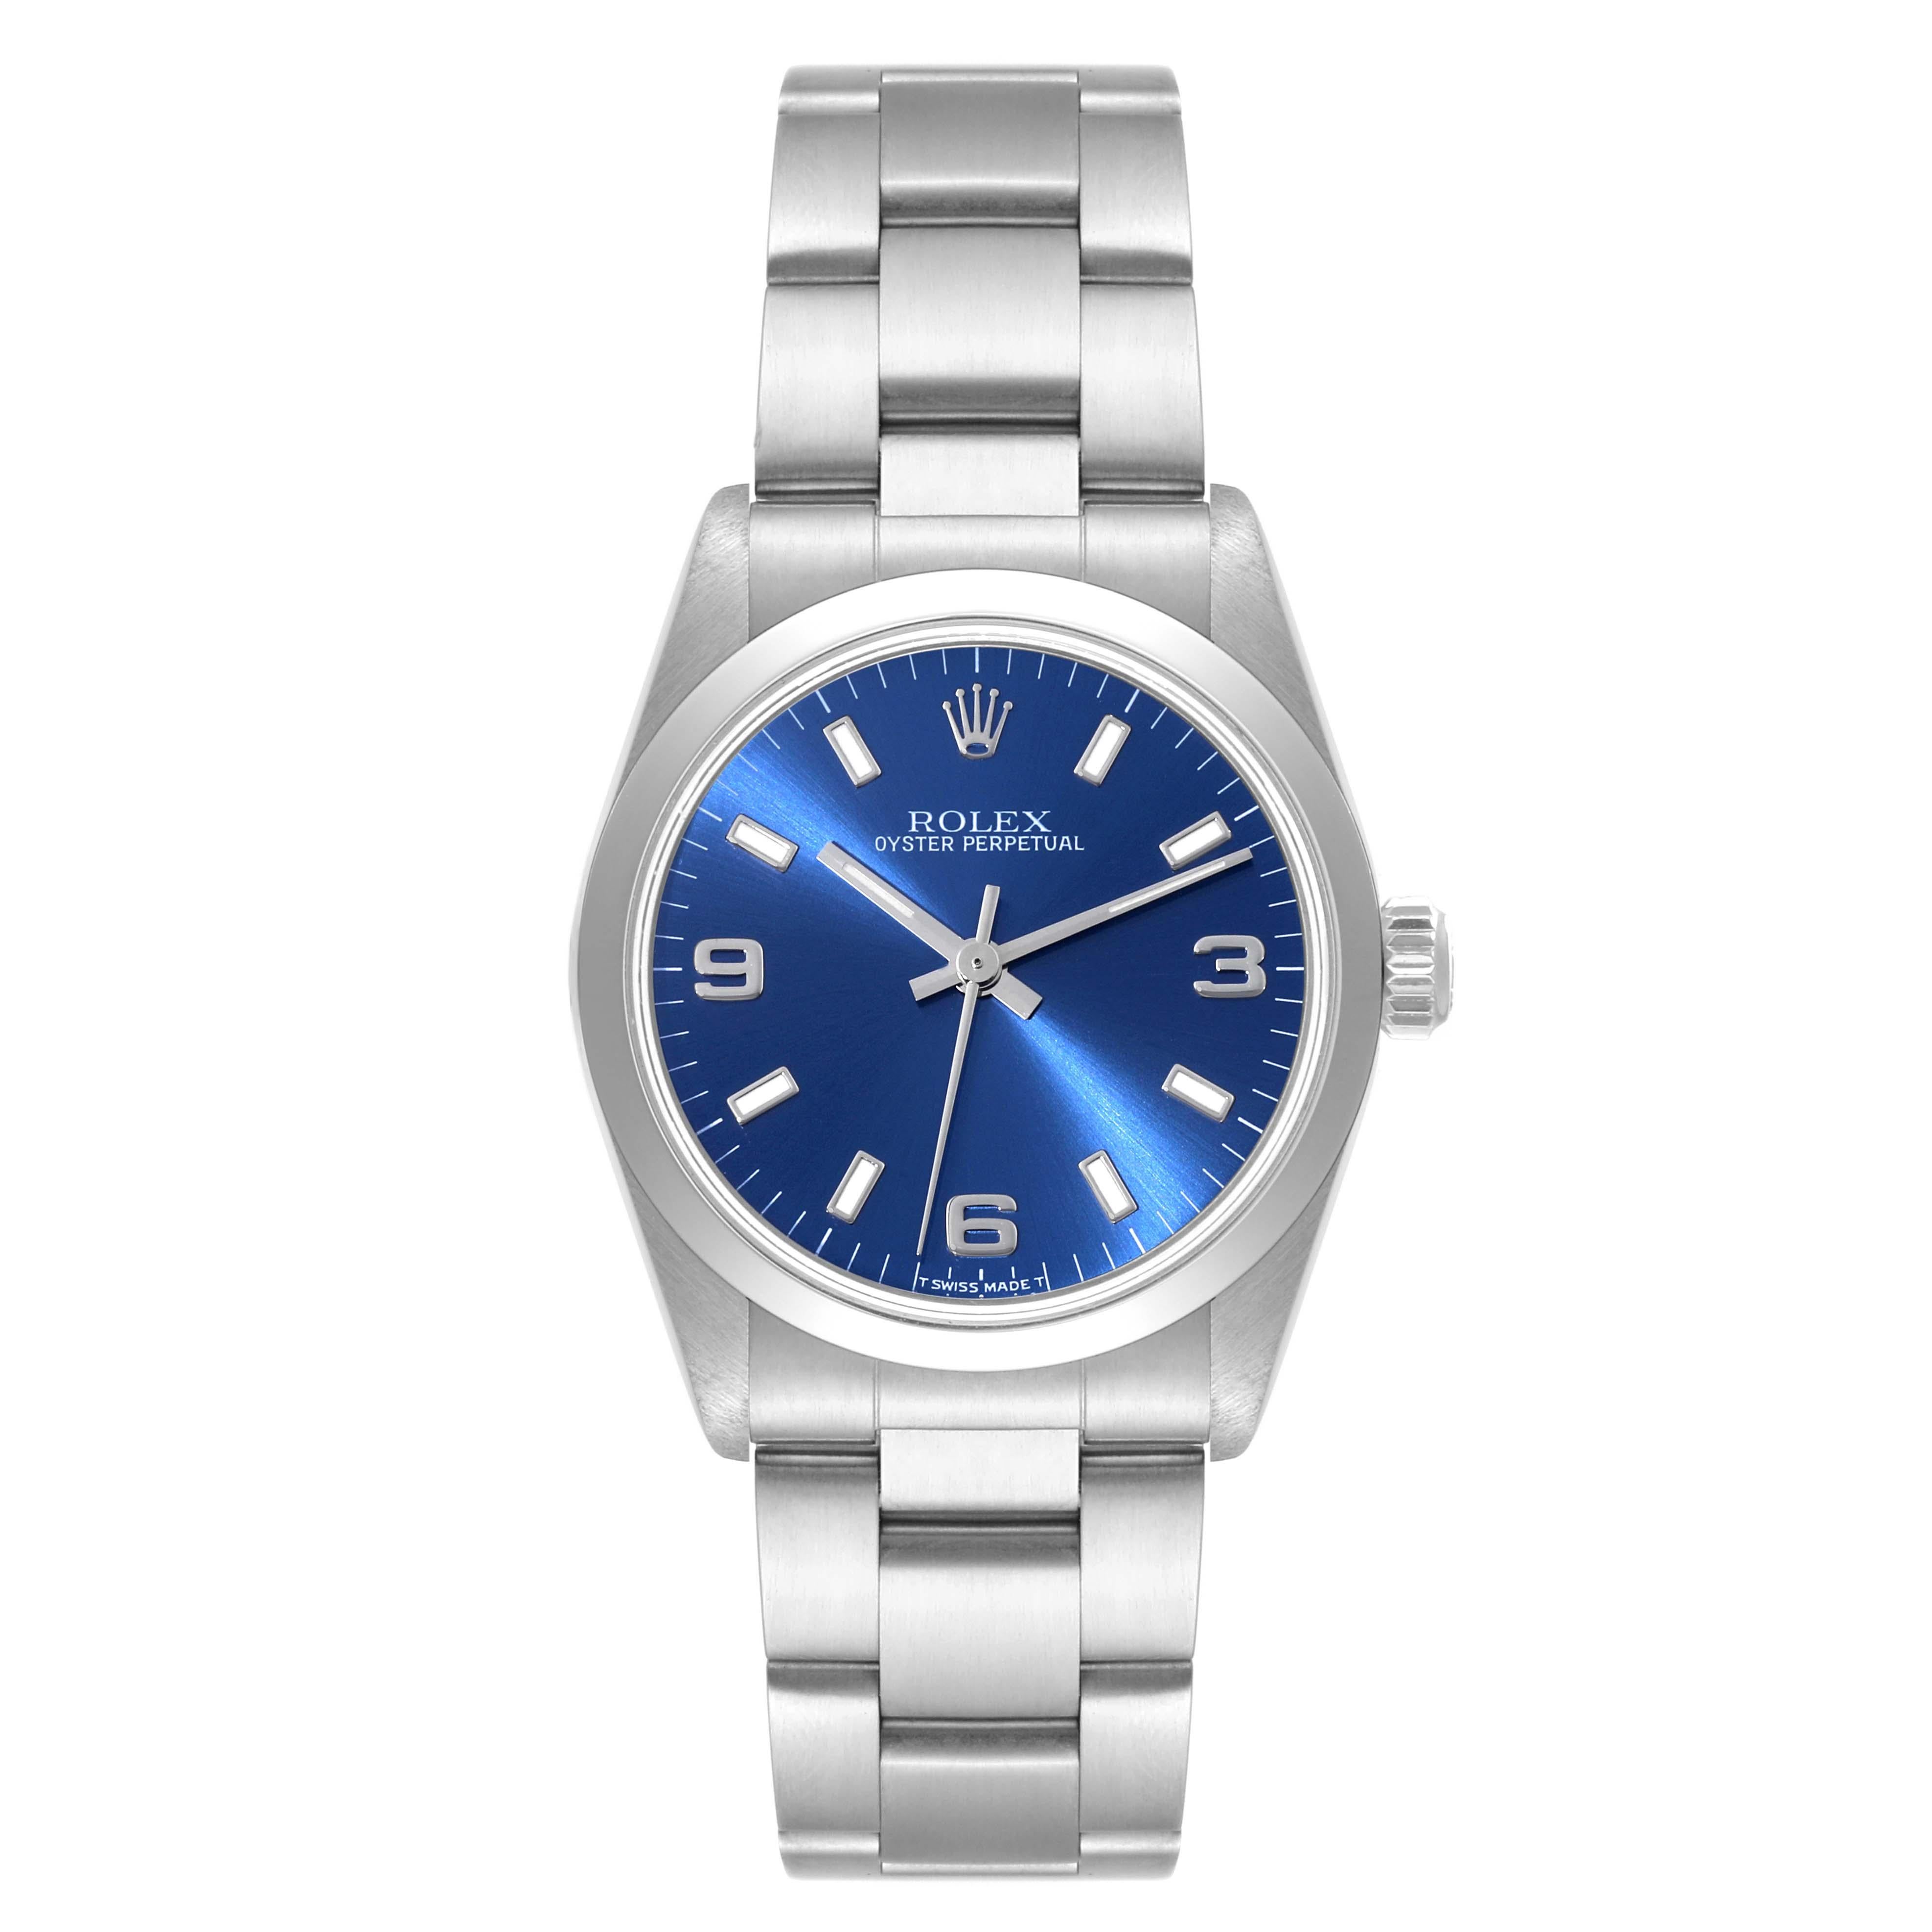 Rolex Midsize 31mm Blue Dial Automatic Steel Ladies Watch 67480. Automatic self-winding movement. Stainless steel oyster case 31.0 mm in diameter. Rolex logo on the crown. Stainless steel smooth bezel. Scratch resistant sapphire crystal. Blue dial